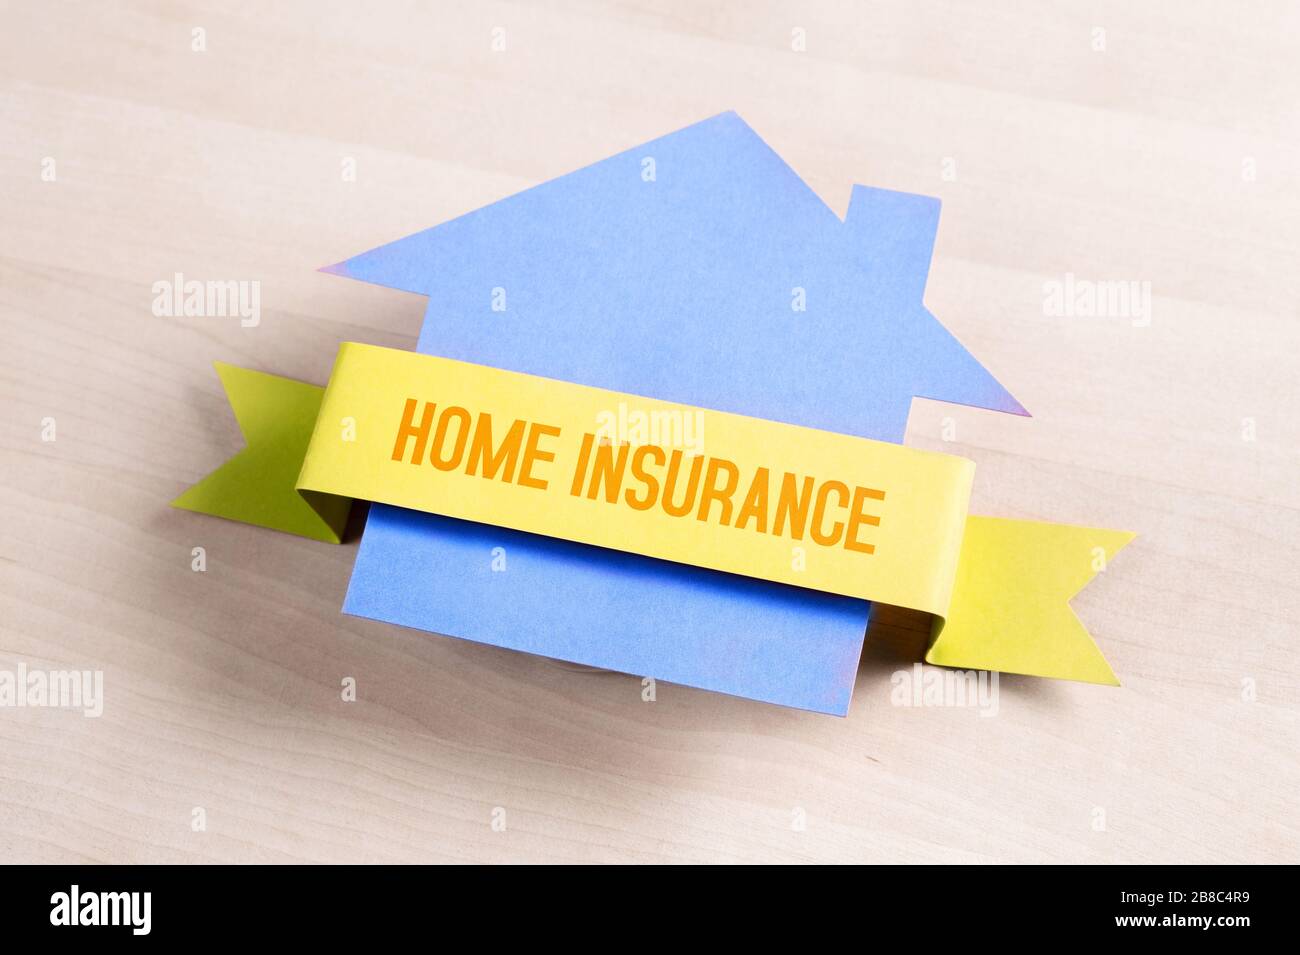 Home insurance concept. Property protection, safety, security and finance. Cardboard paper house and building on table. Stock Photo